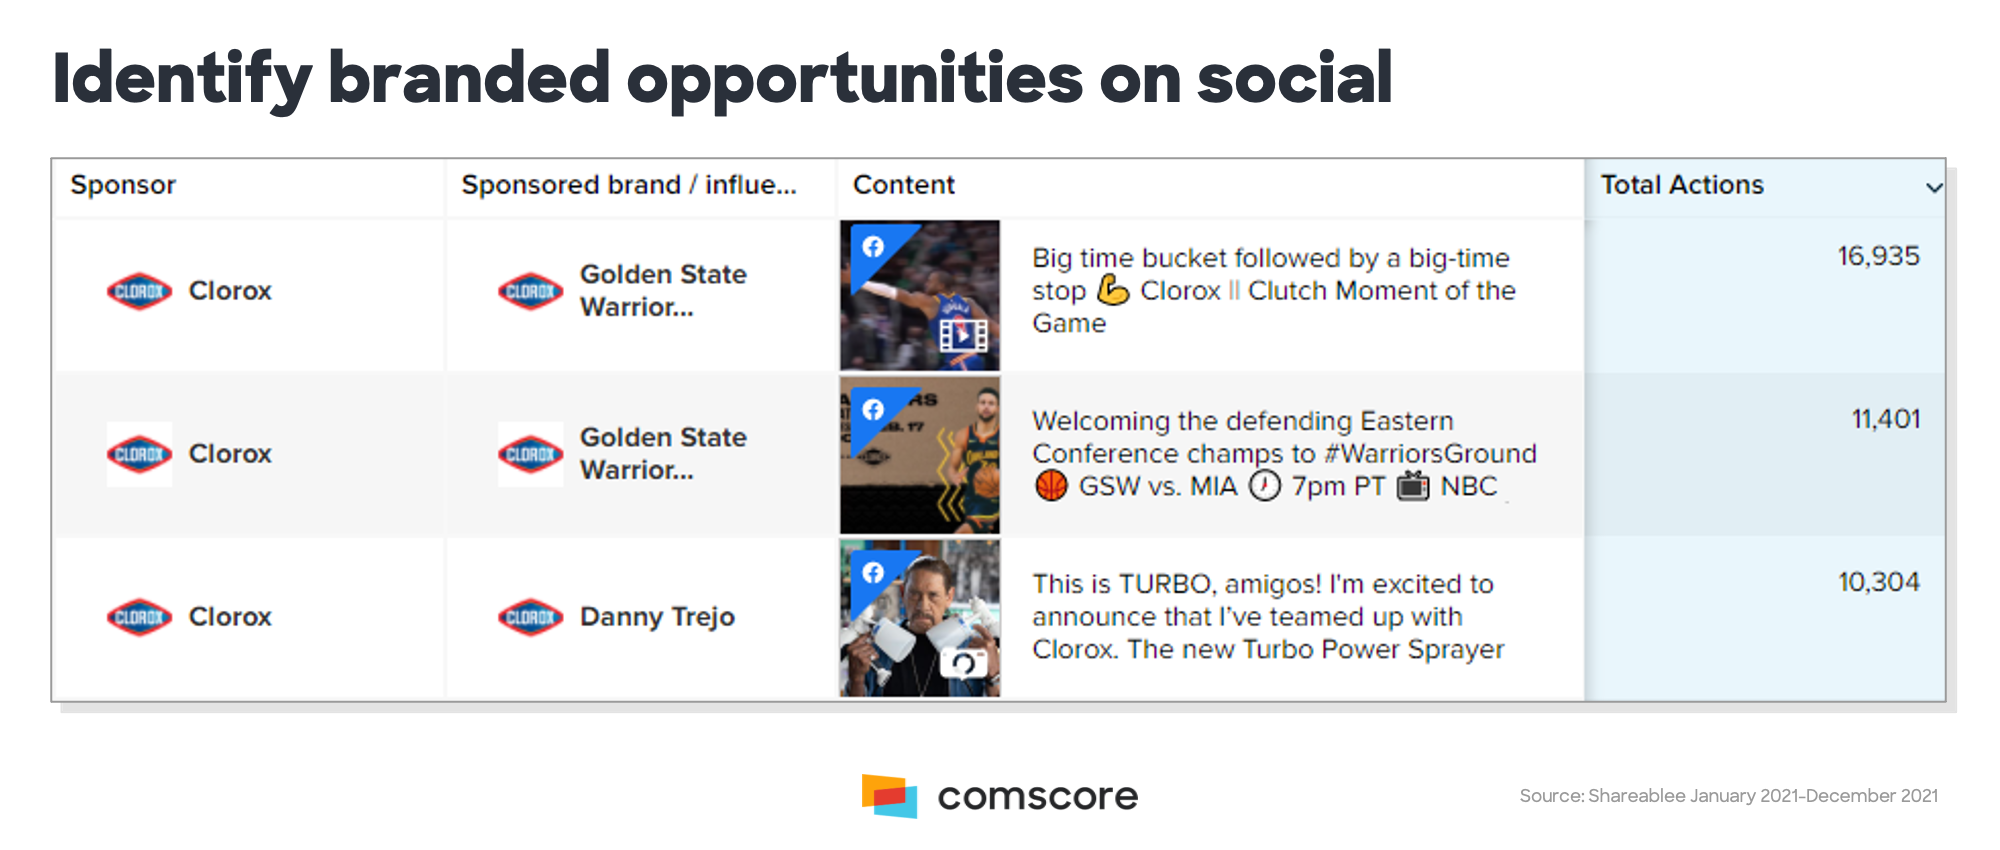 Identify branded opportunities on social